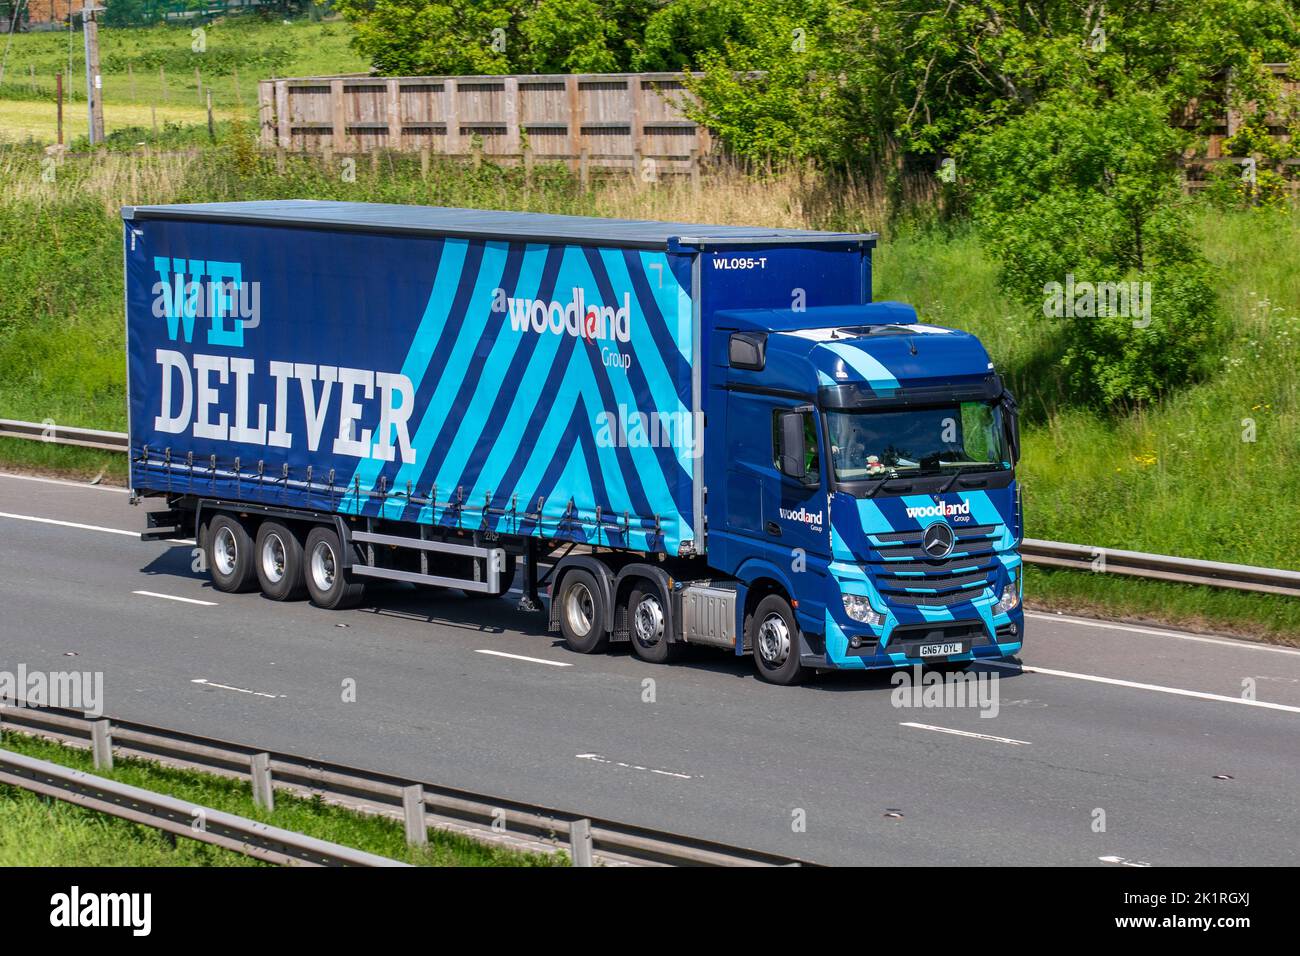 Woodland Group Haulage 'WE DELIVER' trucks, lorry, heavy-duty vehicles, transportation, truck, cargo carrier, blue Mercedes Benz vehicle, European commercial transport industry HGV, M6 at Manchester, UK Stock Photo